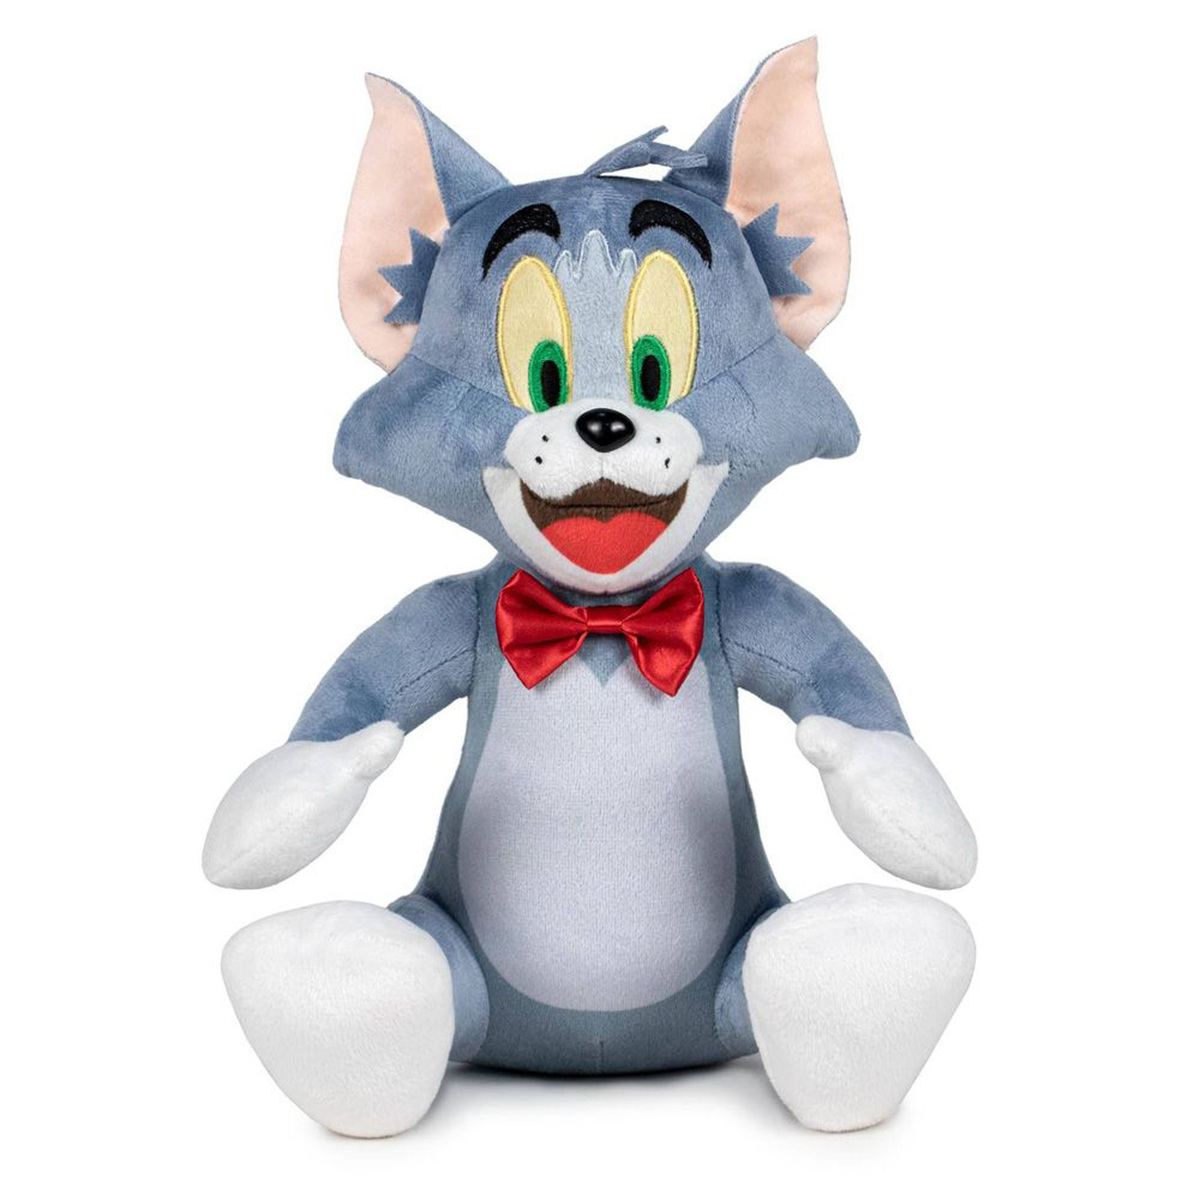 Tom & Jerry Classic Plush Soft Toys, 11 inches, Assorted, 760022181